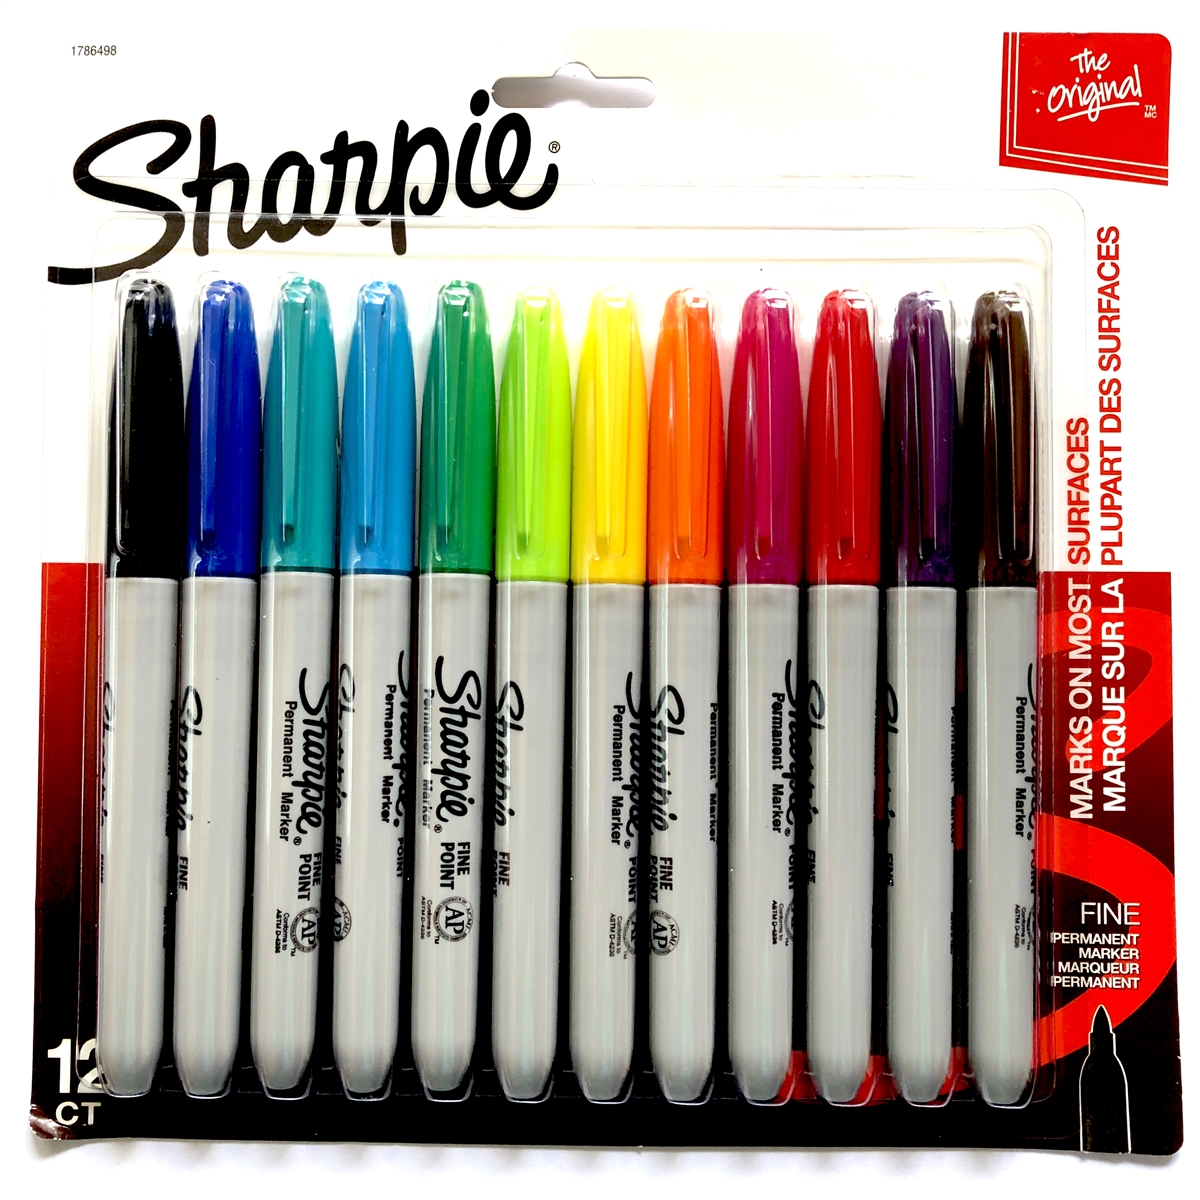 Sharpie Pink Ribbon Fine Point Permanent Markers, Black - 12 pack